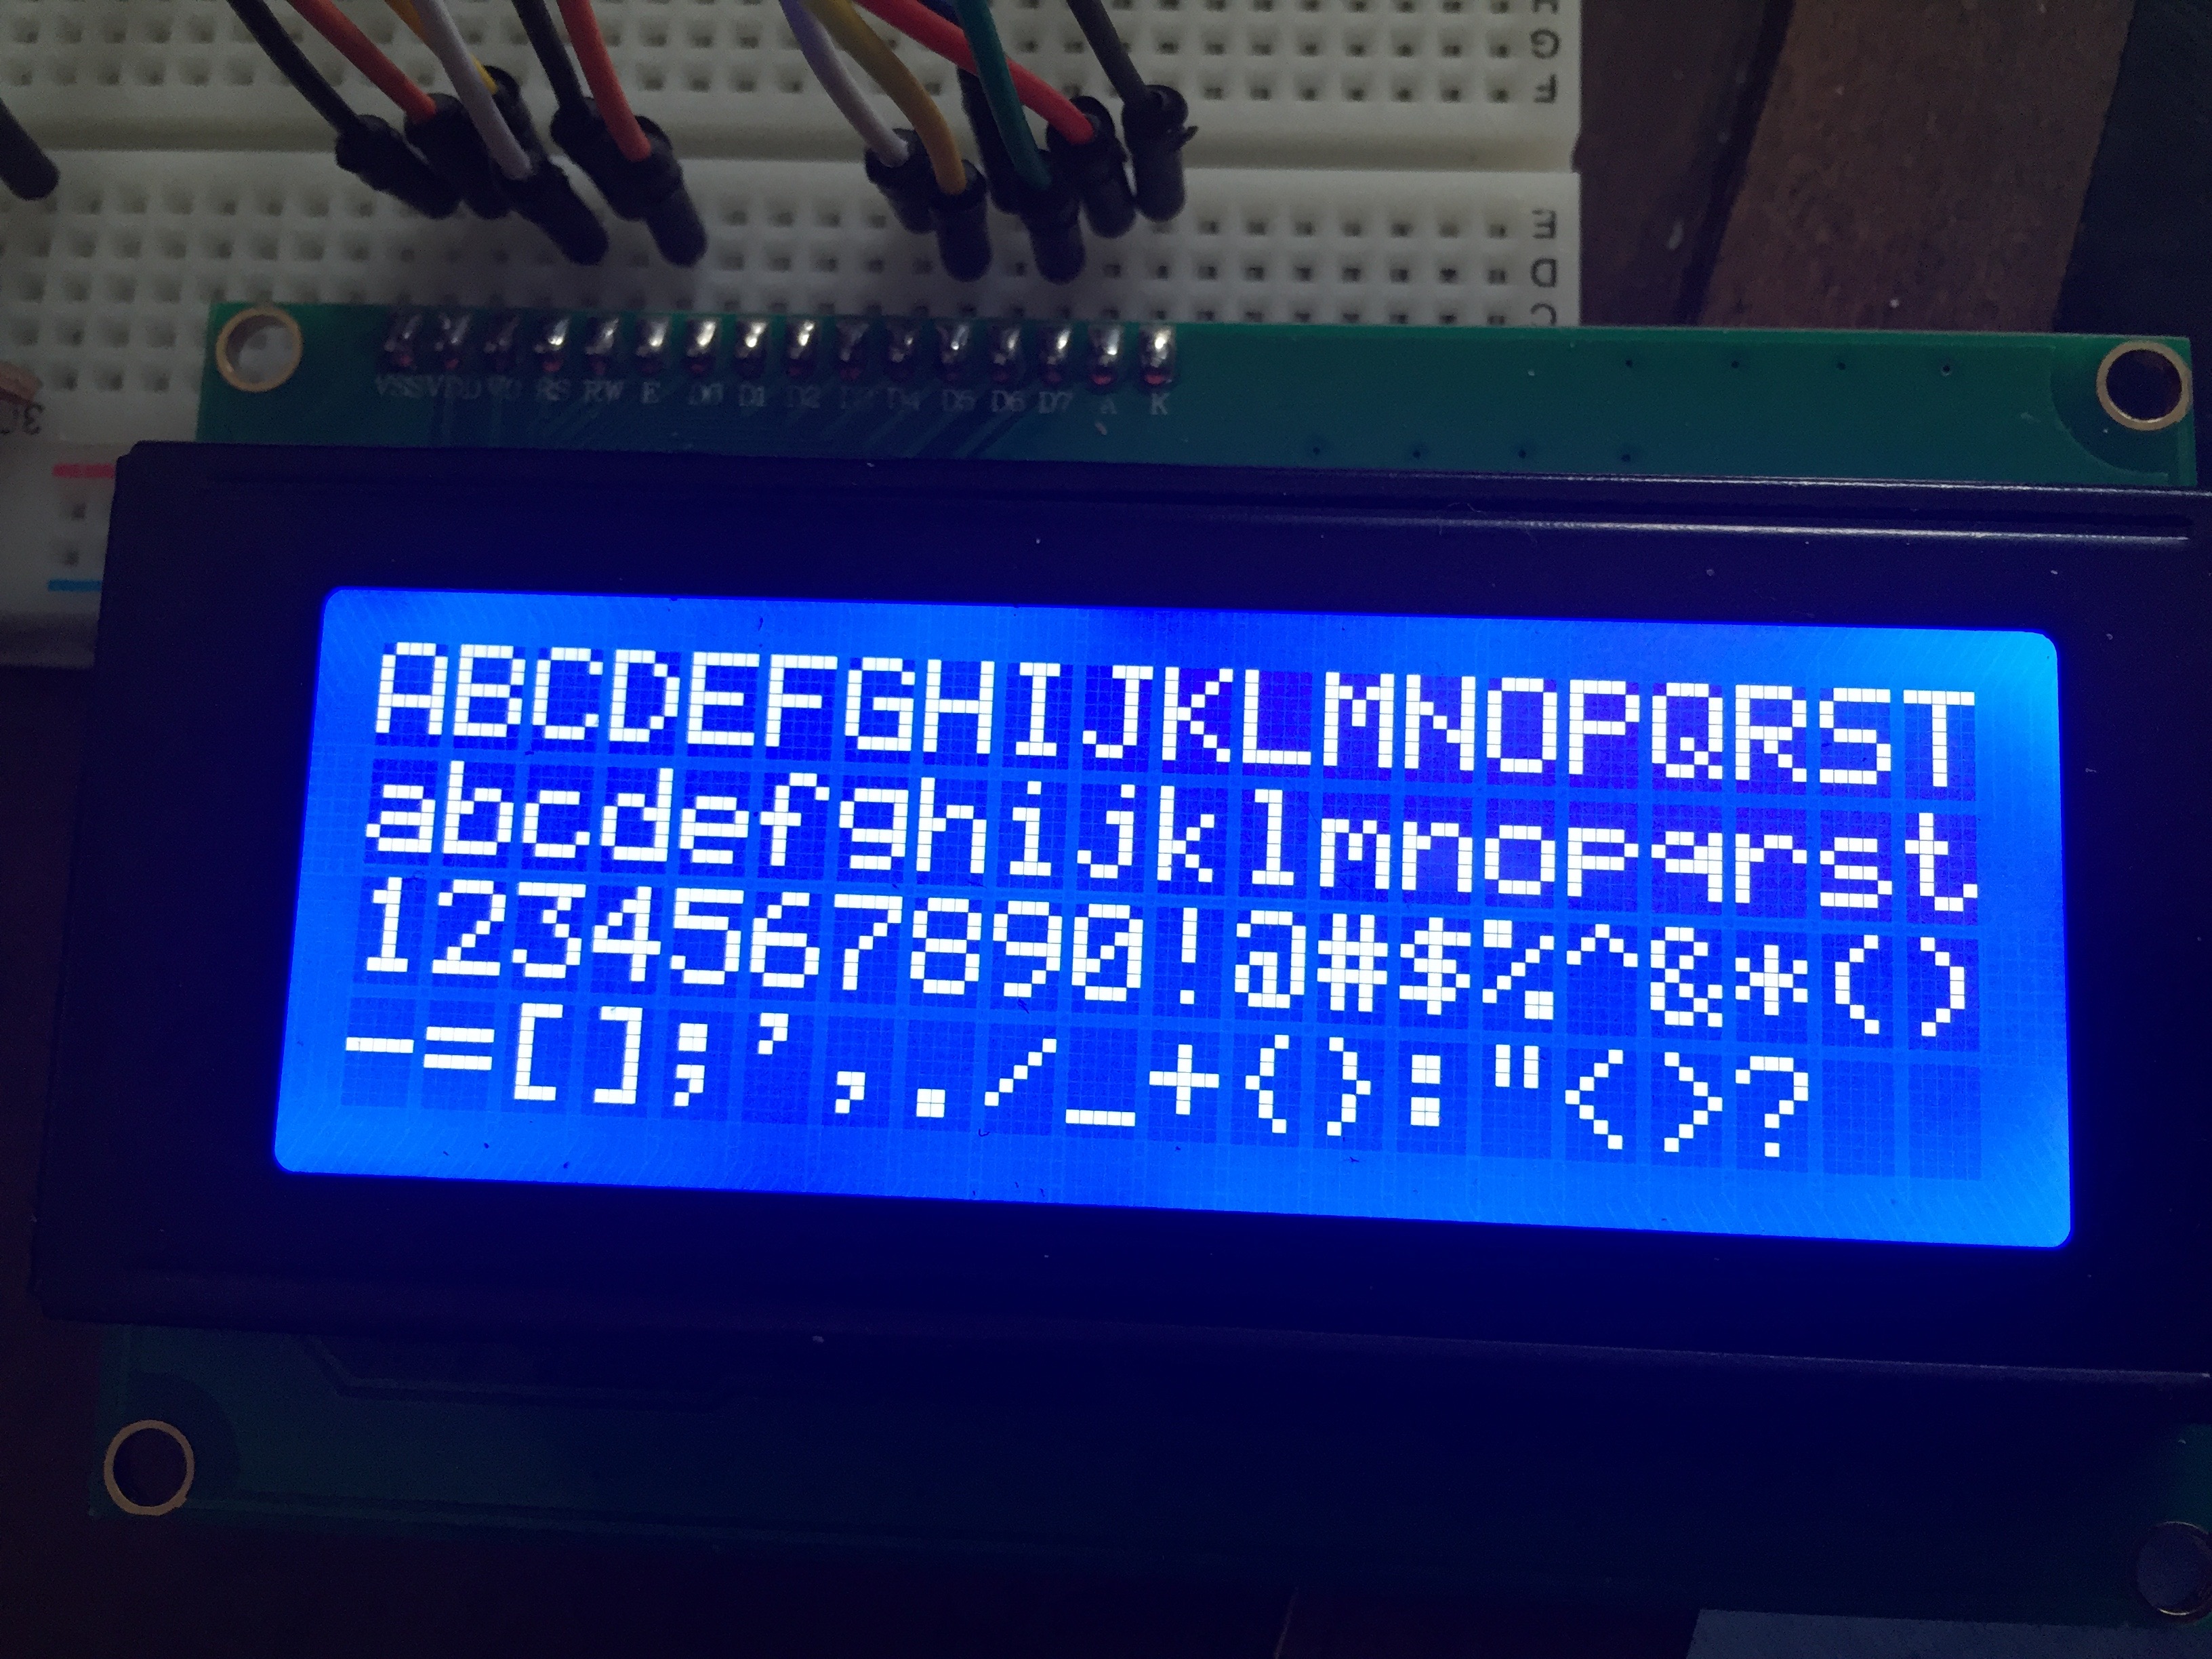 ../../_images/working_with_a_lcd_character_display_lcd_character_display.jpg